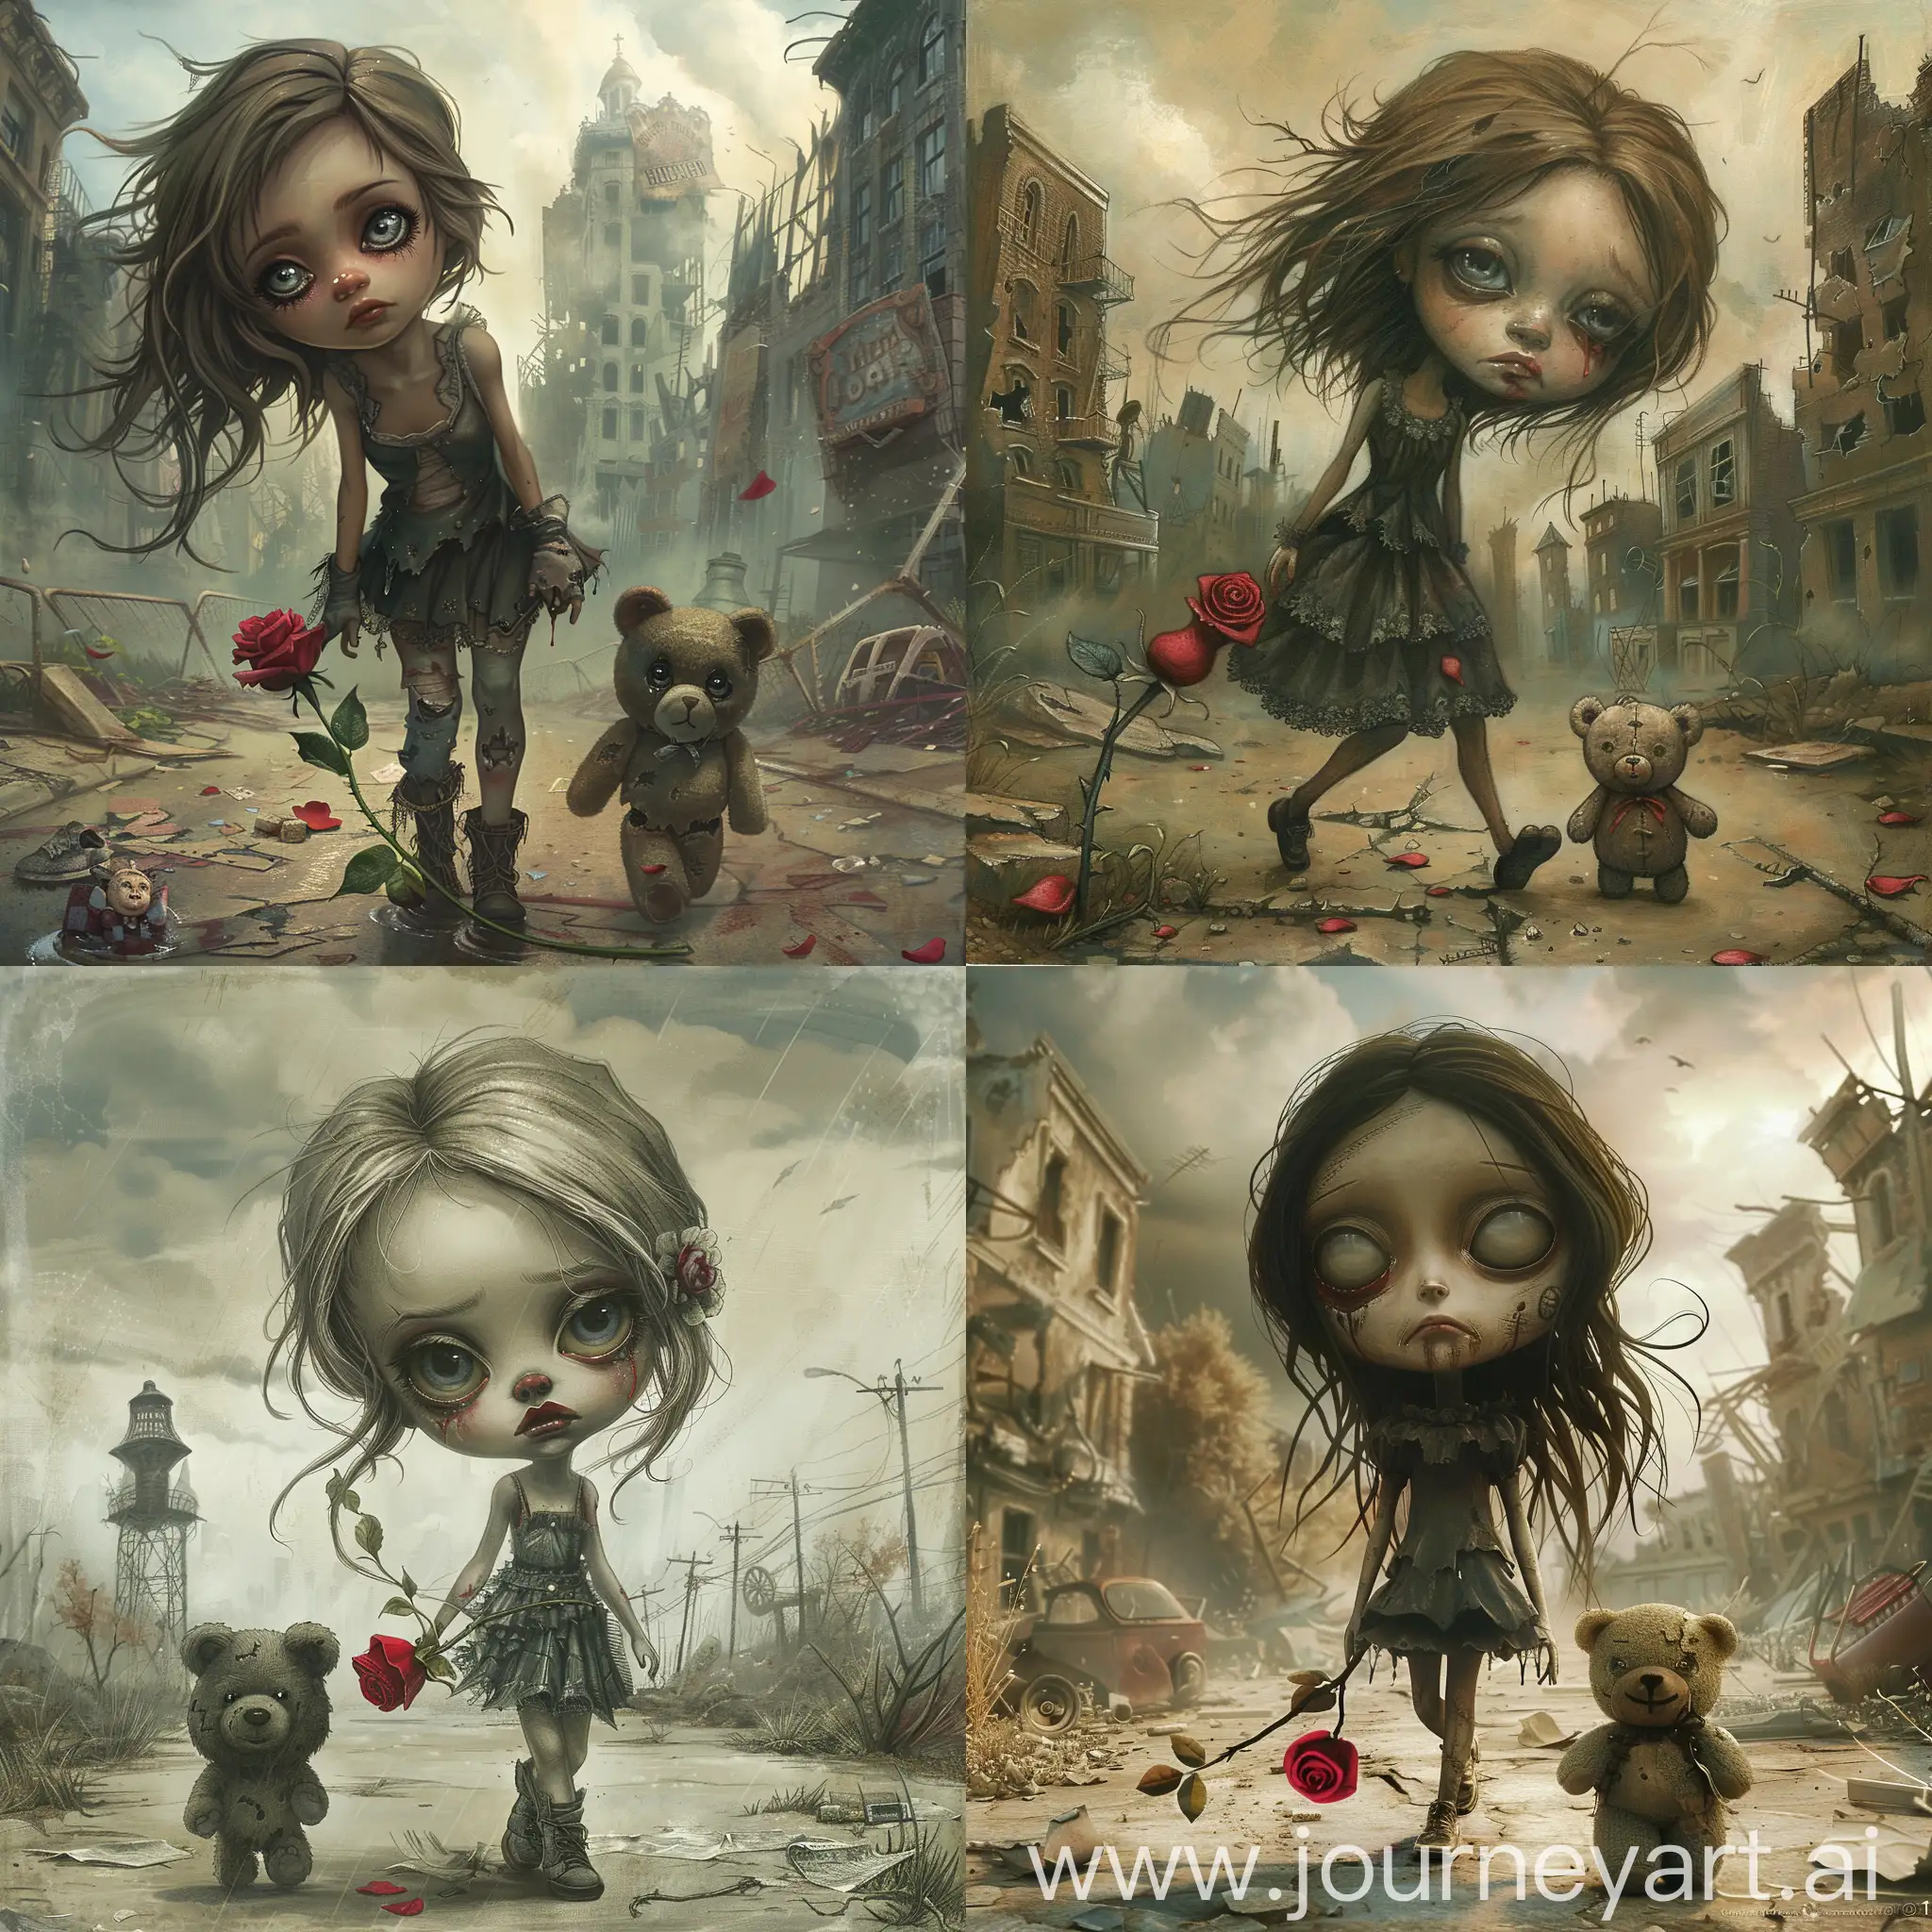 Melancholic-Beauty-in-a-PostApocalyptic-America-with-Red-Rose-and-Loyal-Teddy-Bear